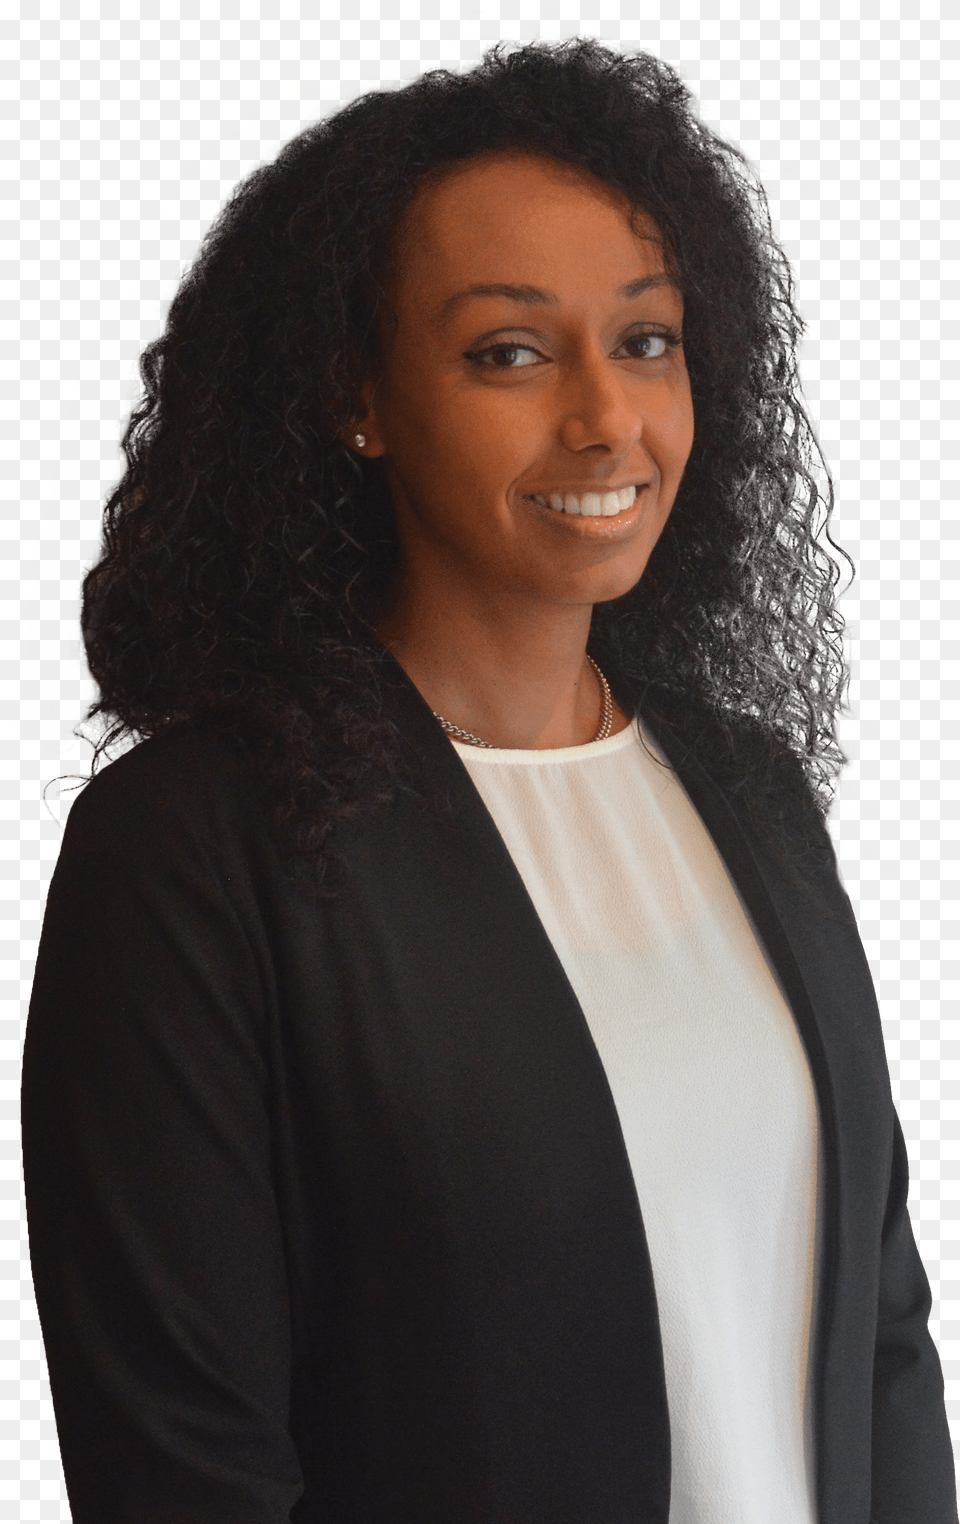 Real Estate Agent Png Image